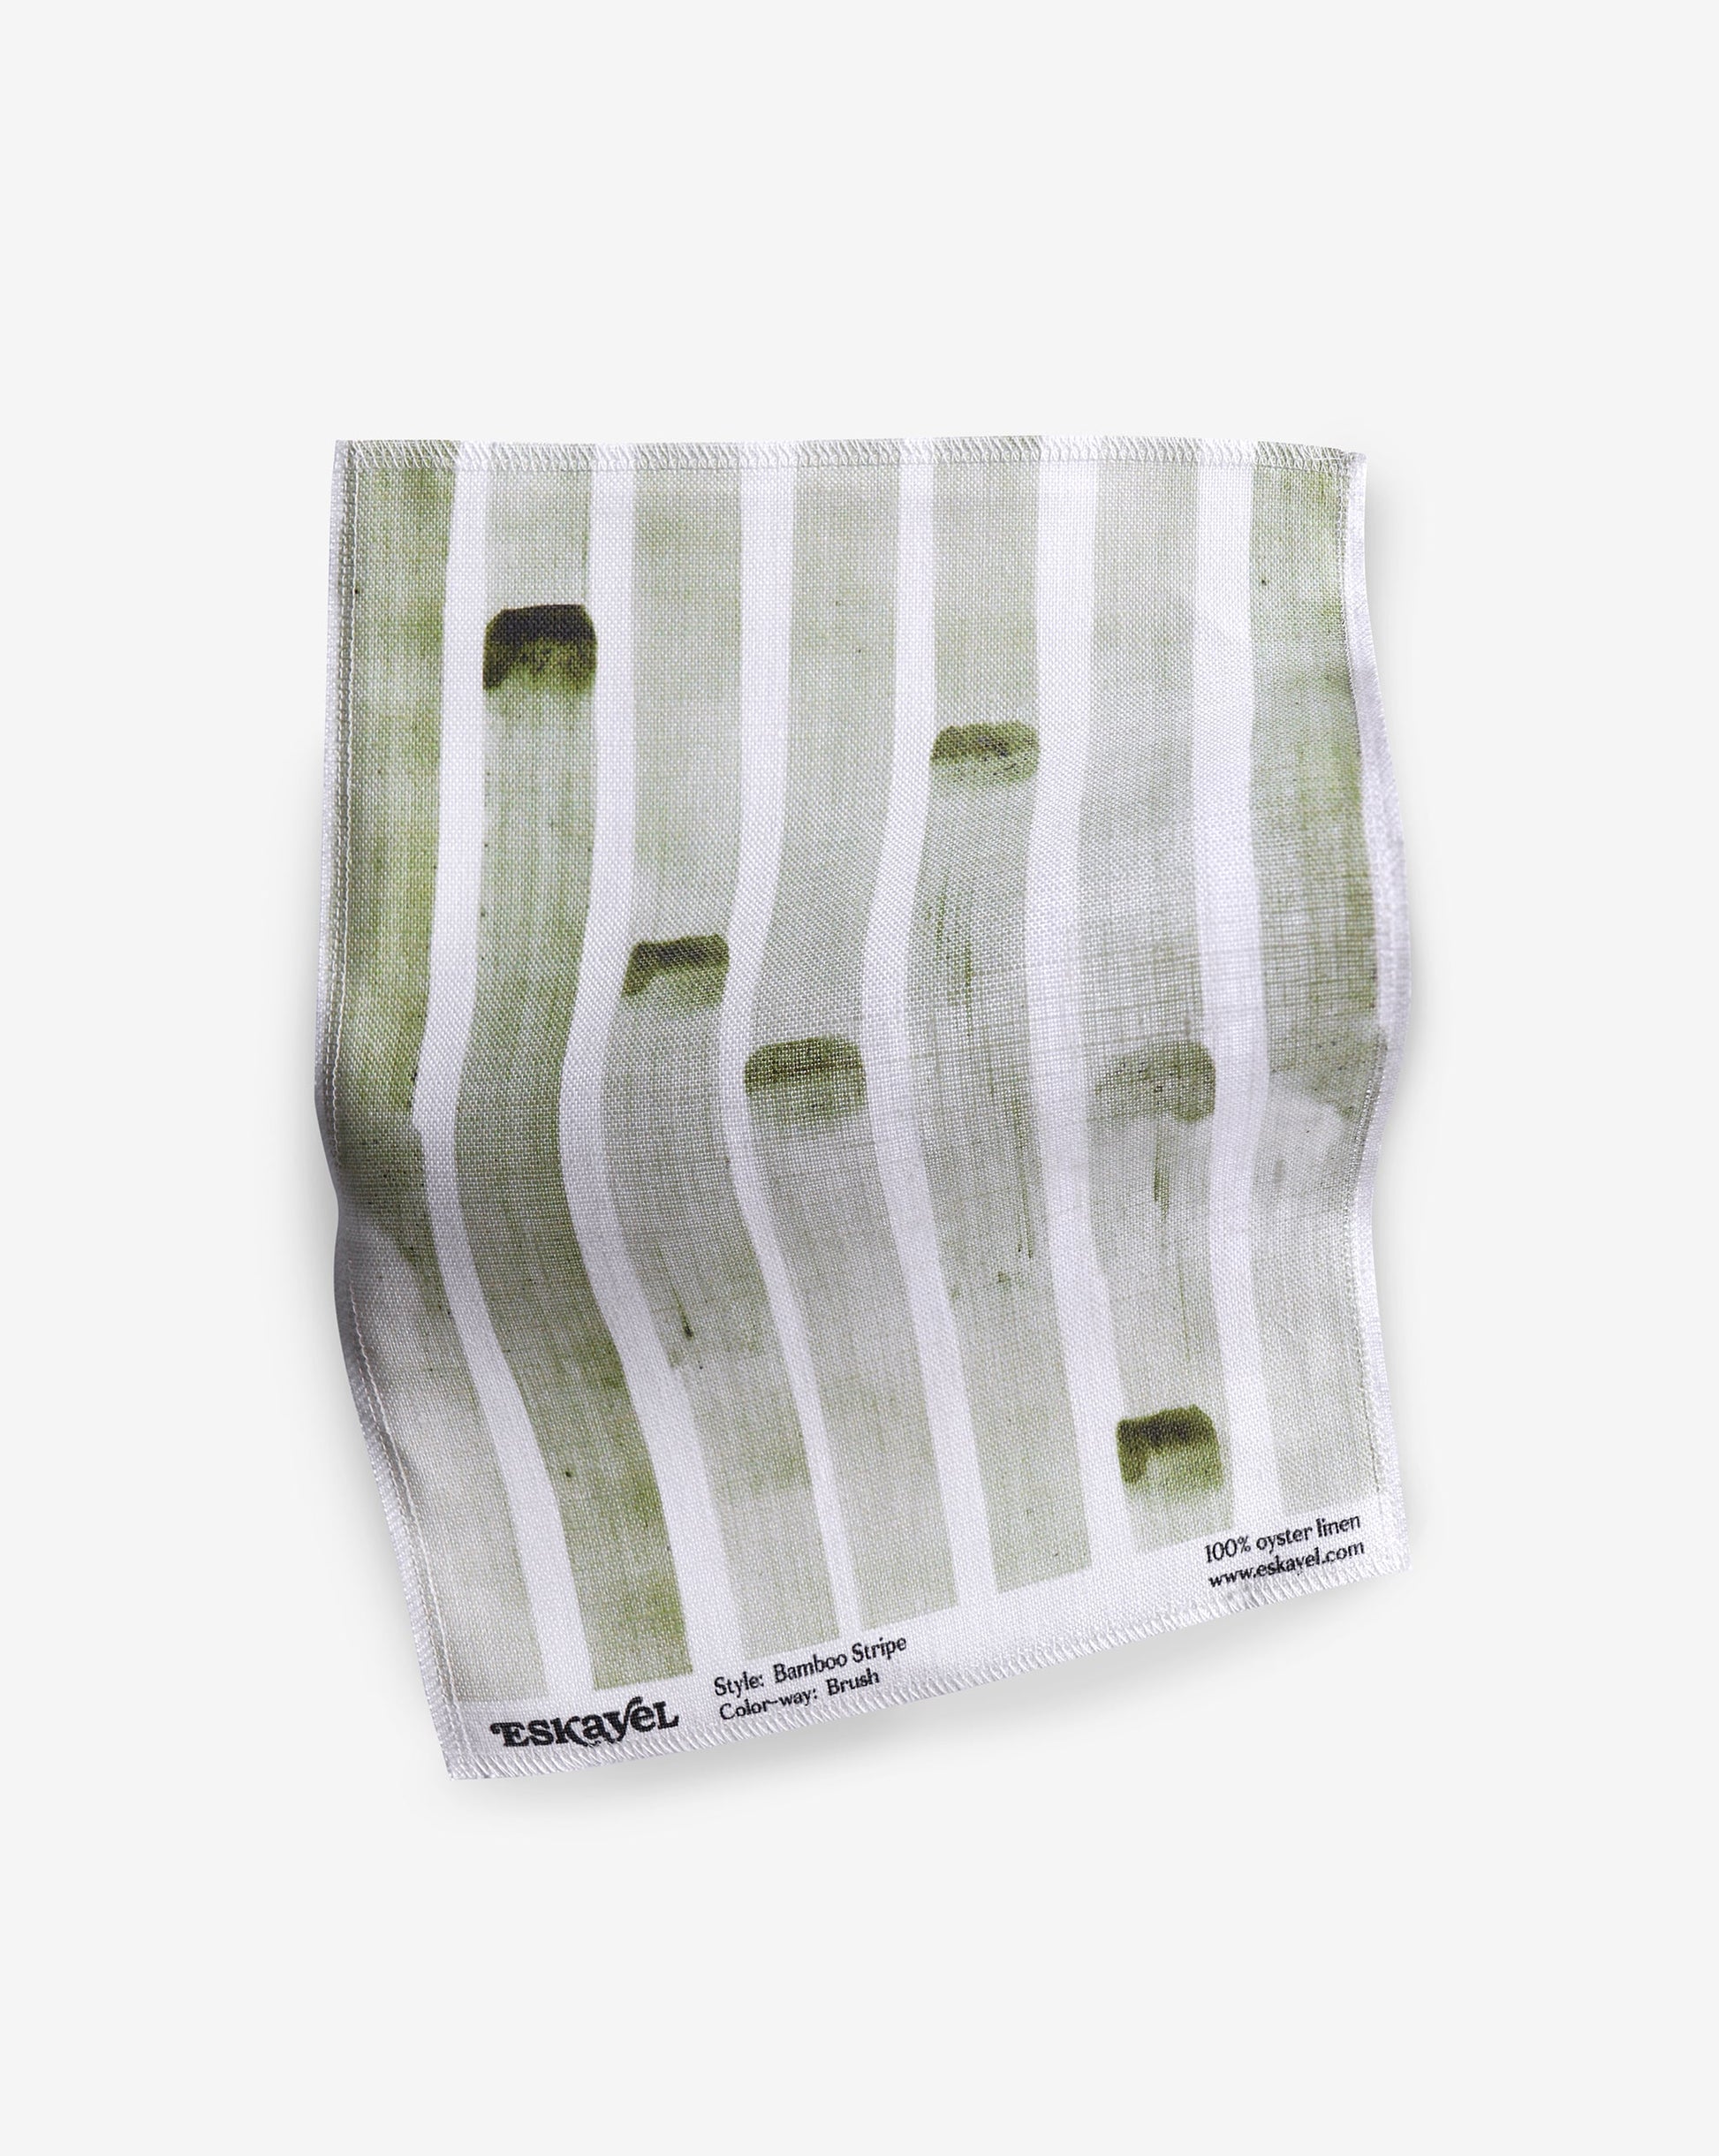 a sample of the Bamboo Stripe fabric with green and white stripes on it